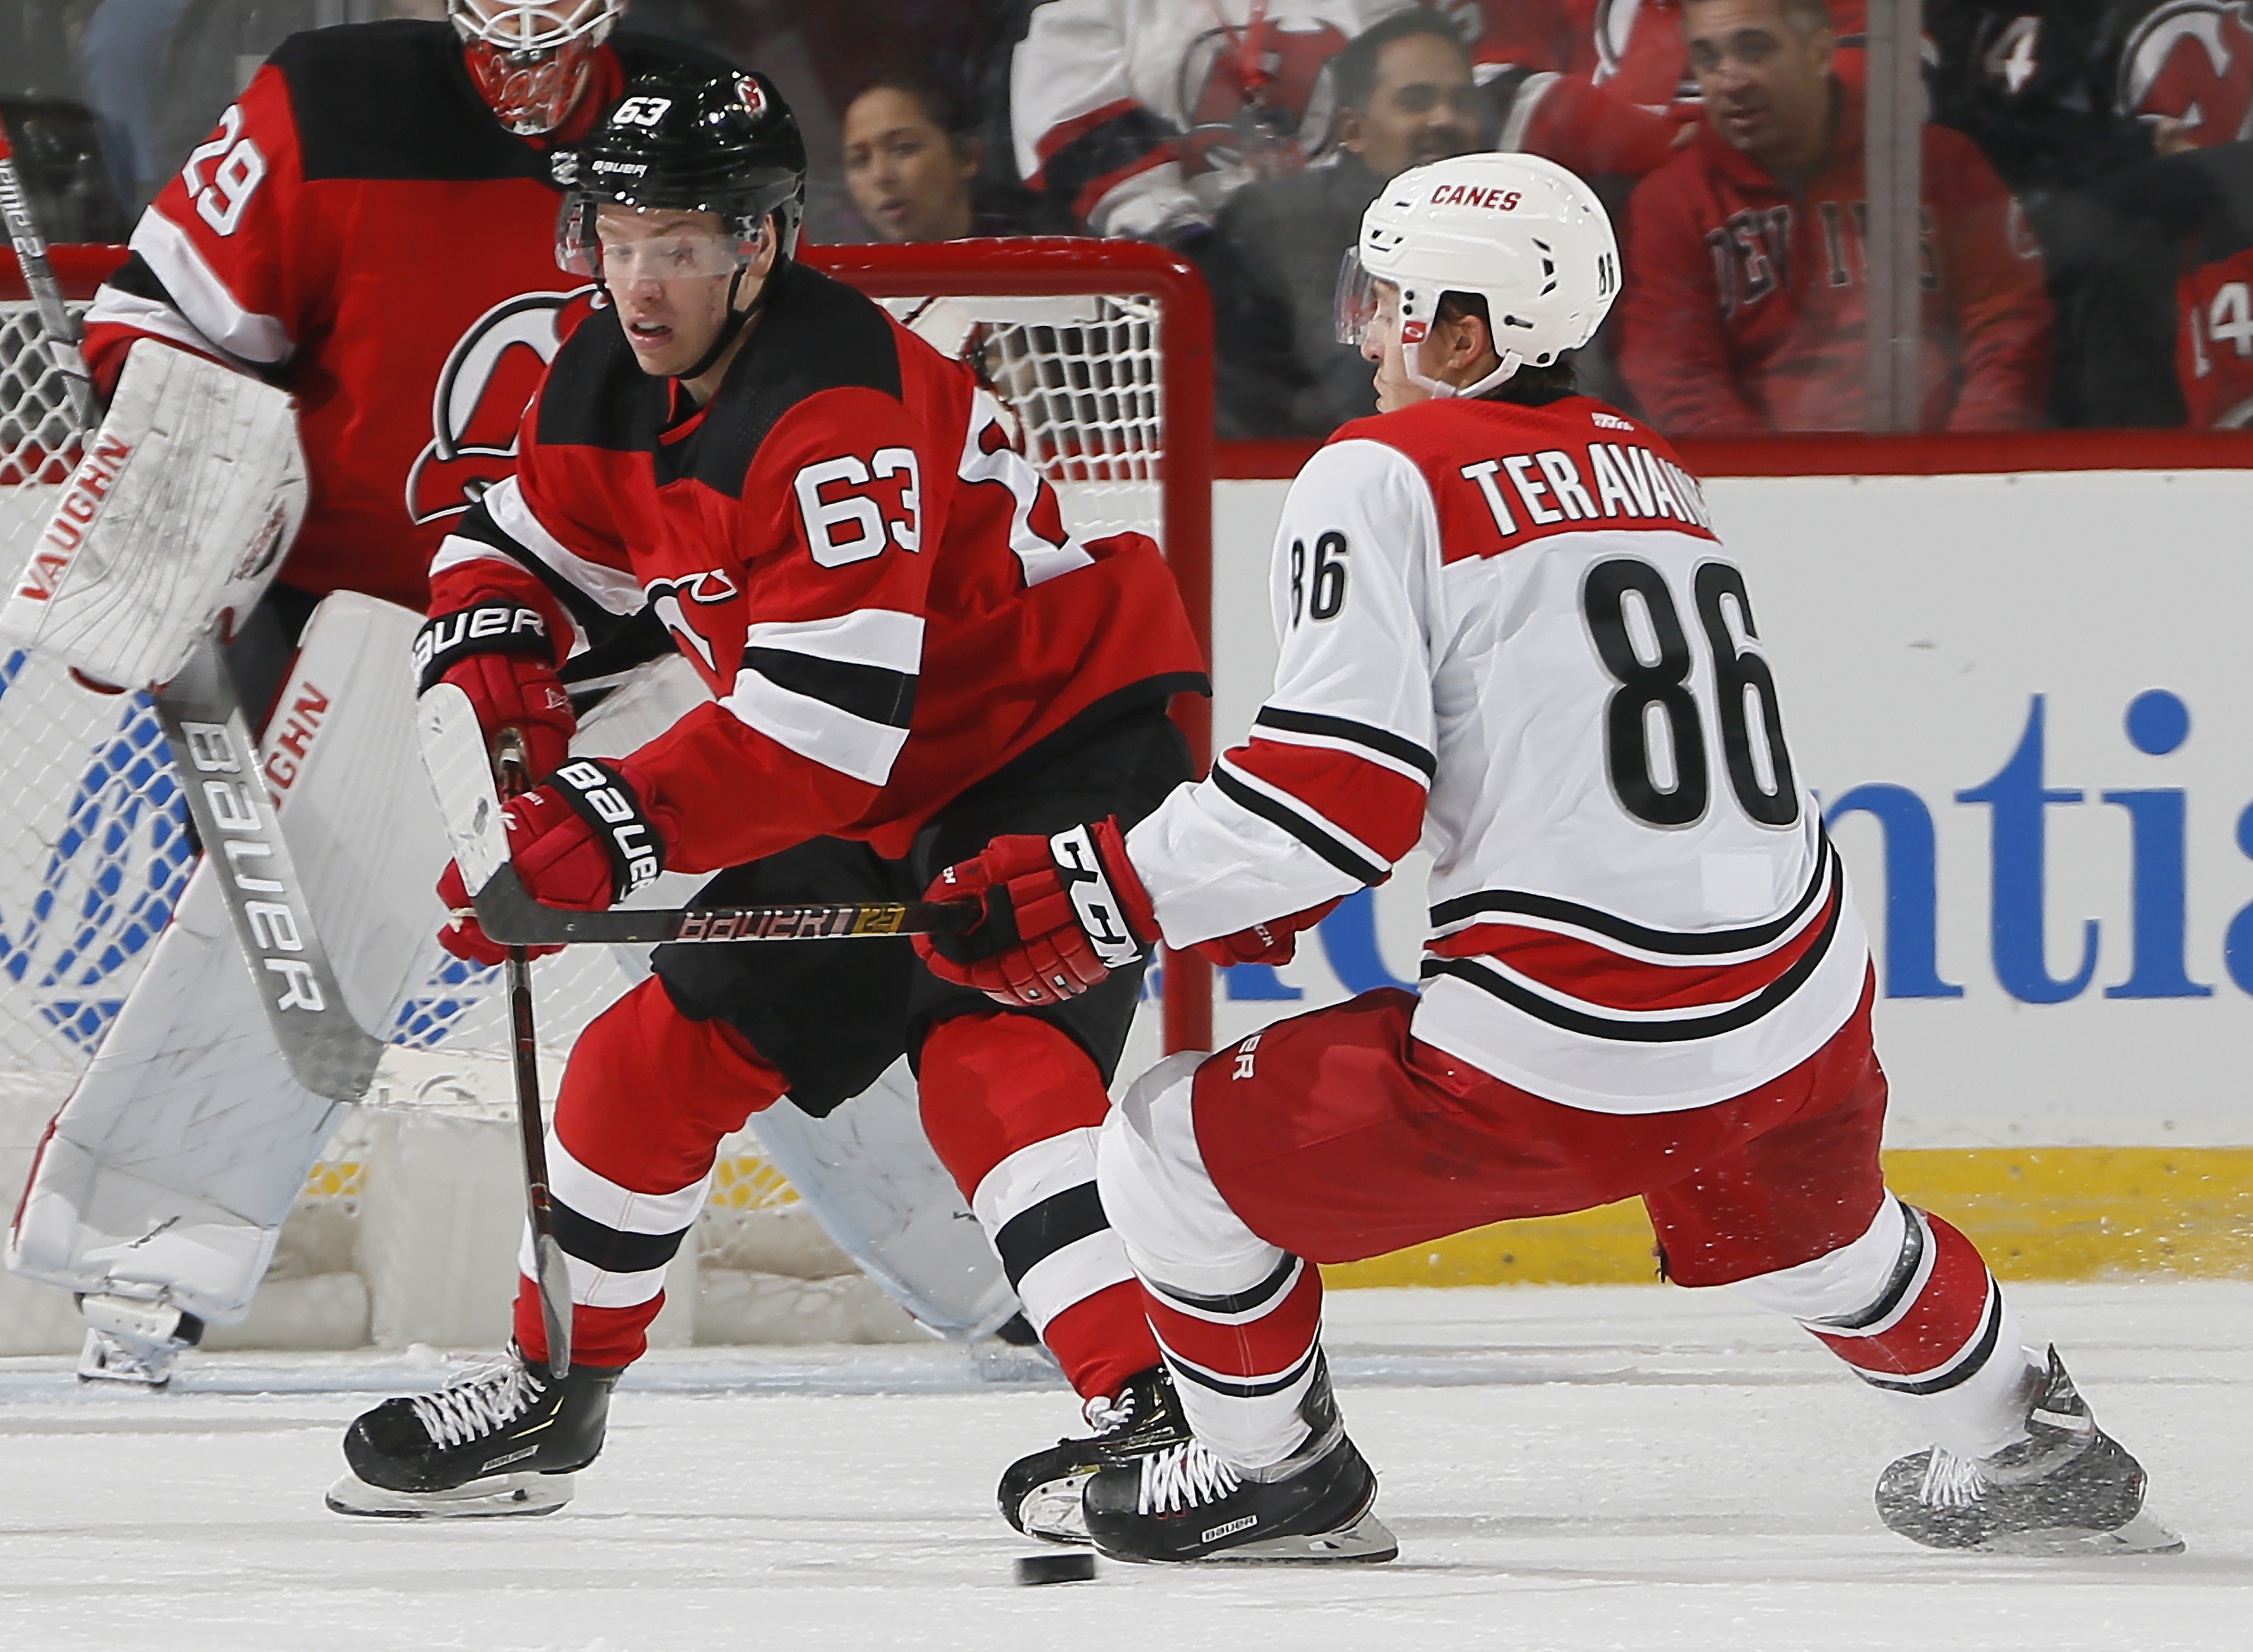 Game Preview #63: New Jersey Devils vs. New York Rangers - All